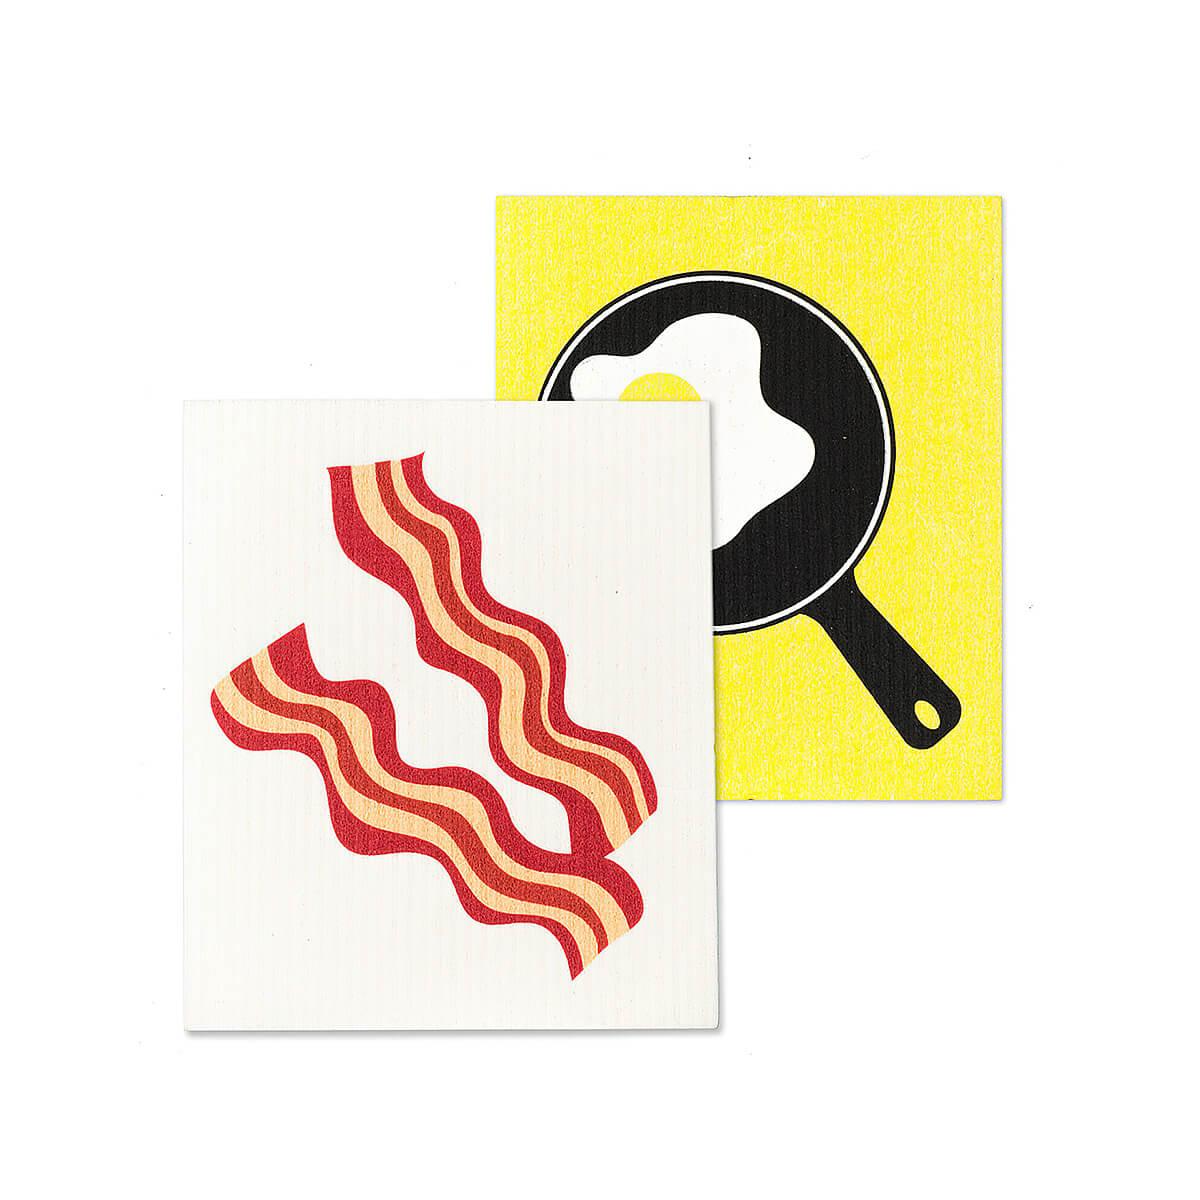  Bacon And Eggs Dishcloths - 2 Pack